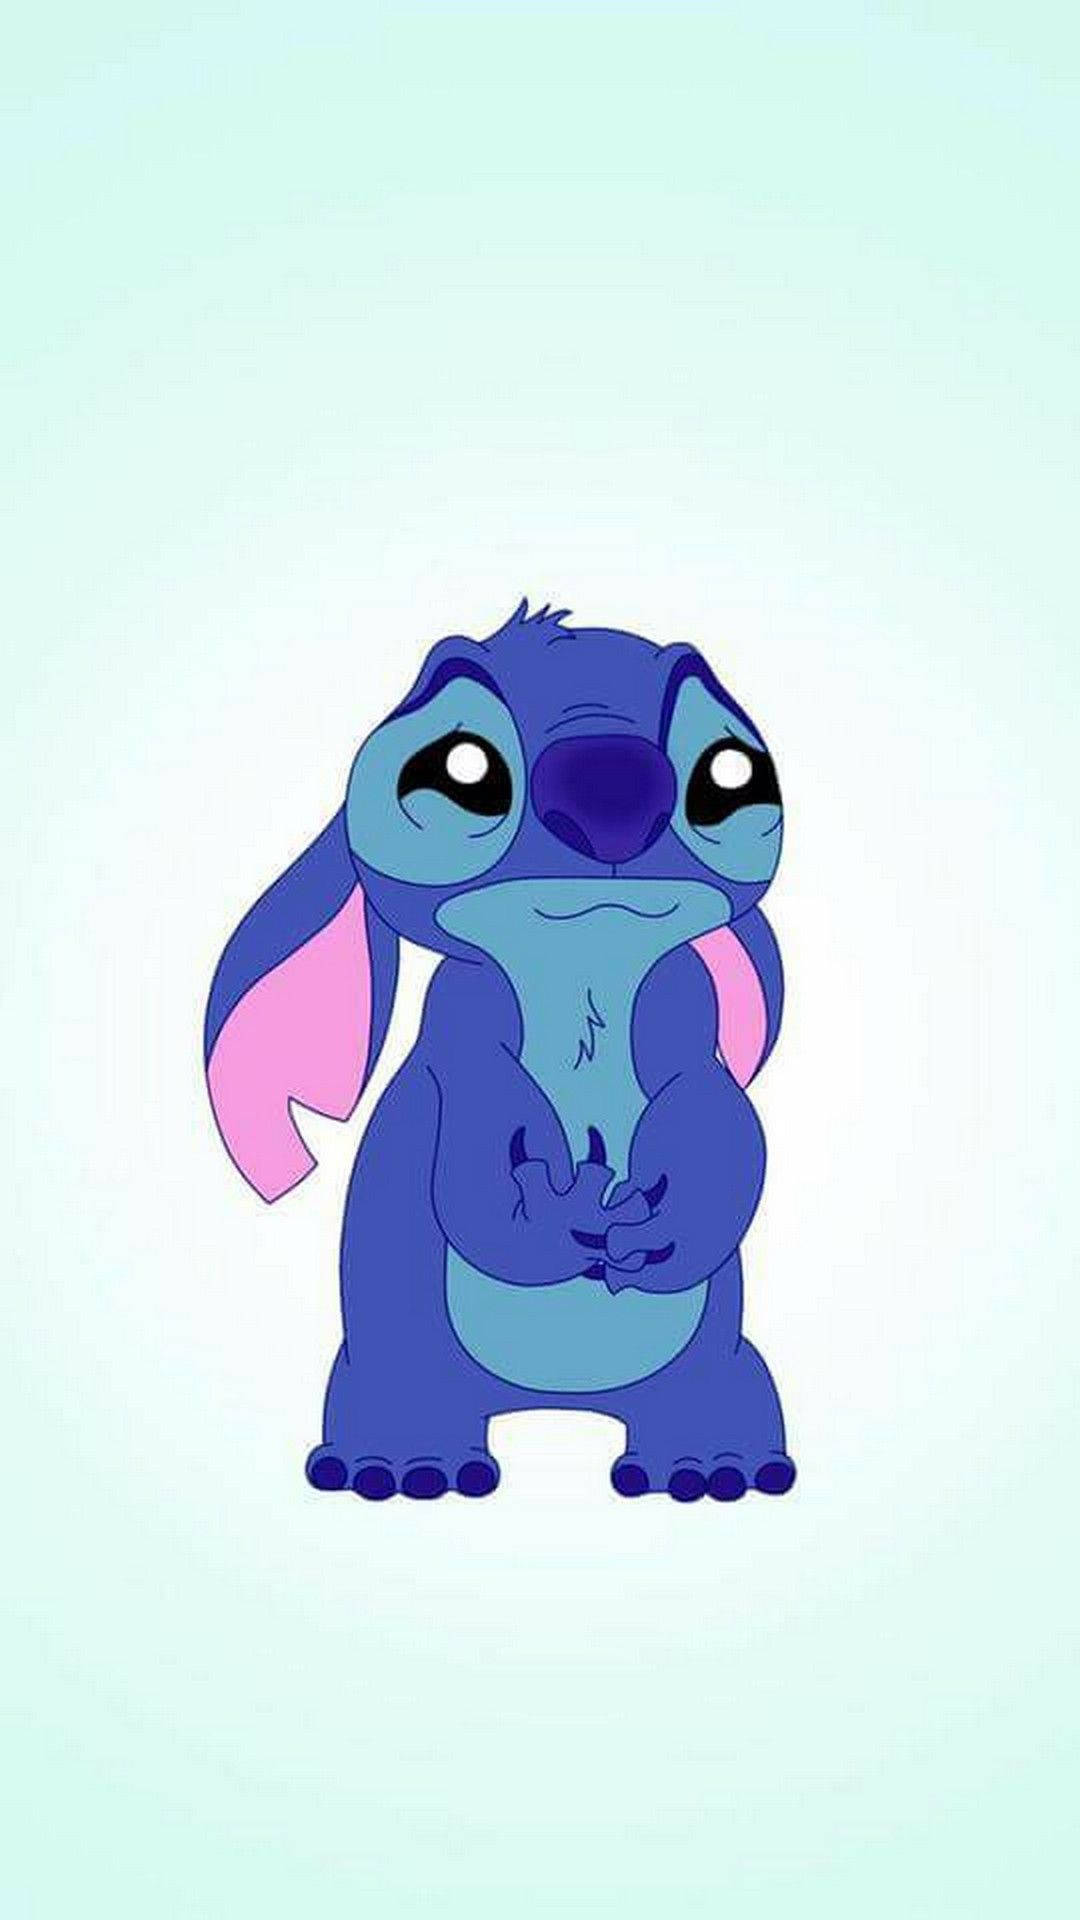 Cute Aesthetic Stitch Sad And Crying